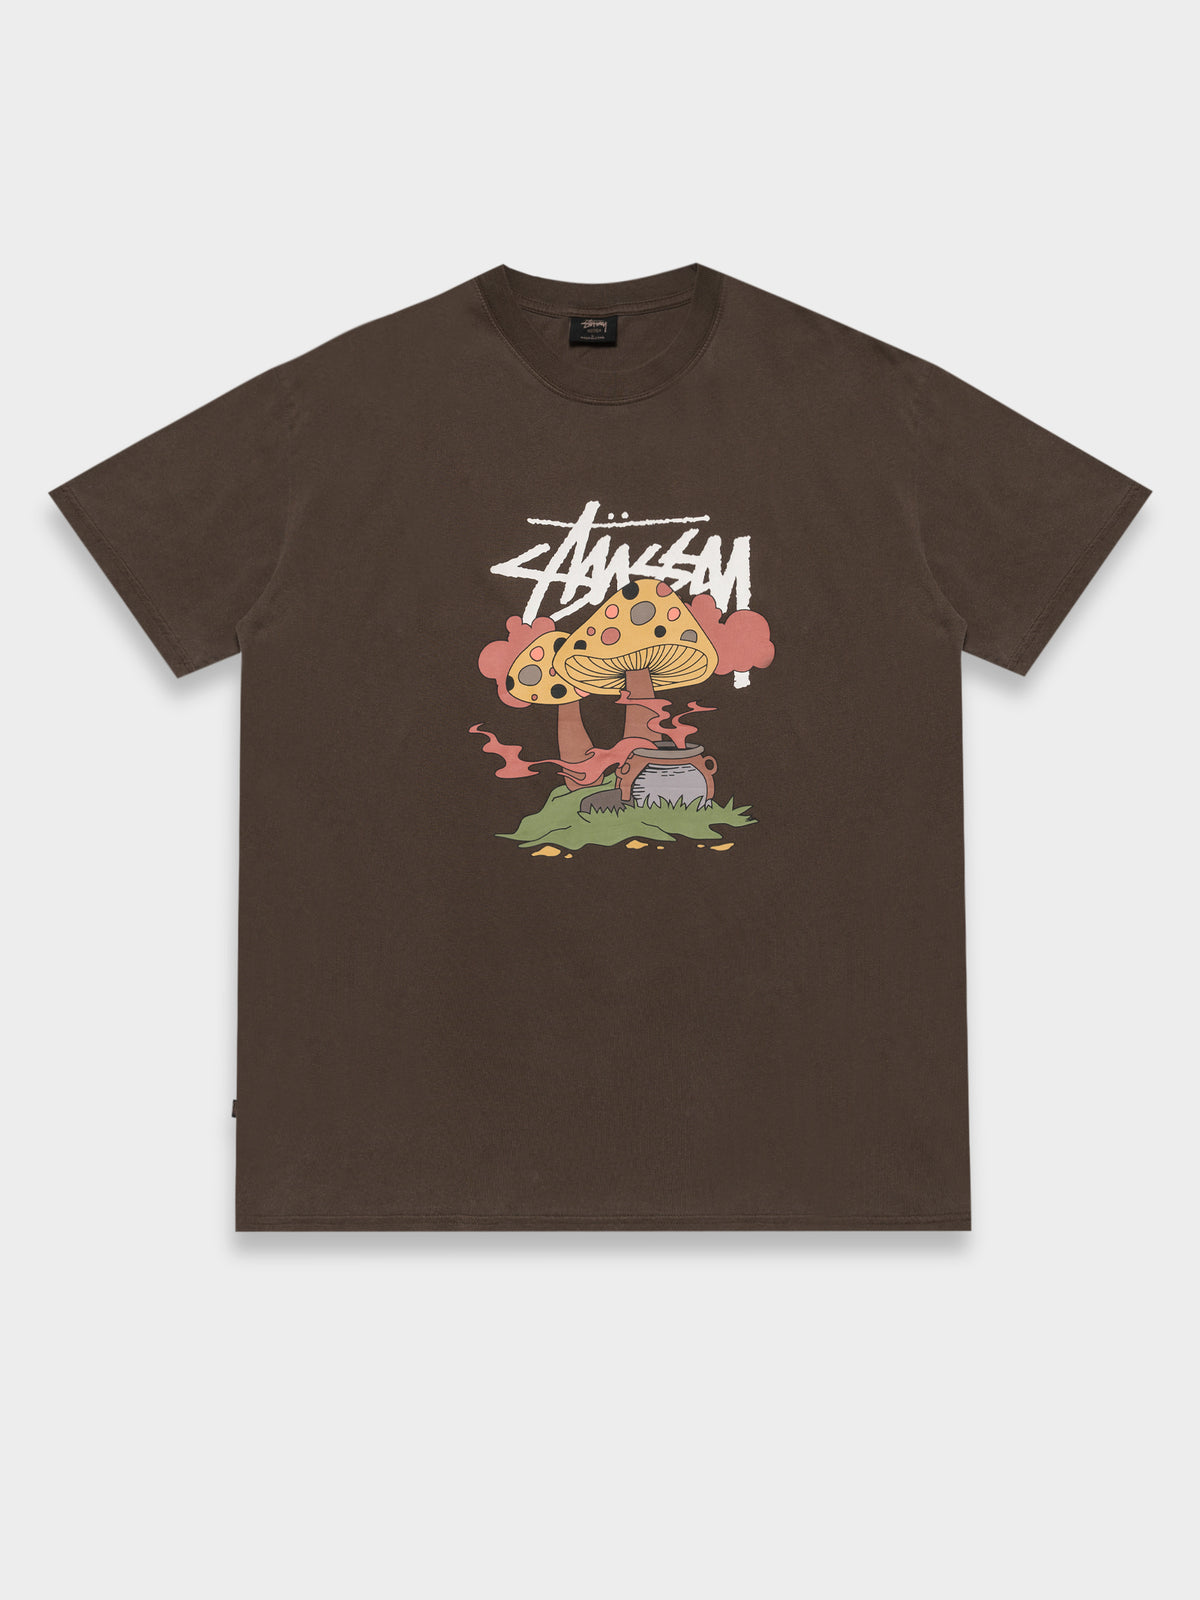 Something Cooking 50/50 T-Shirt in Pigment Brown